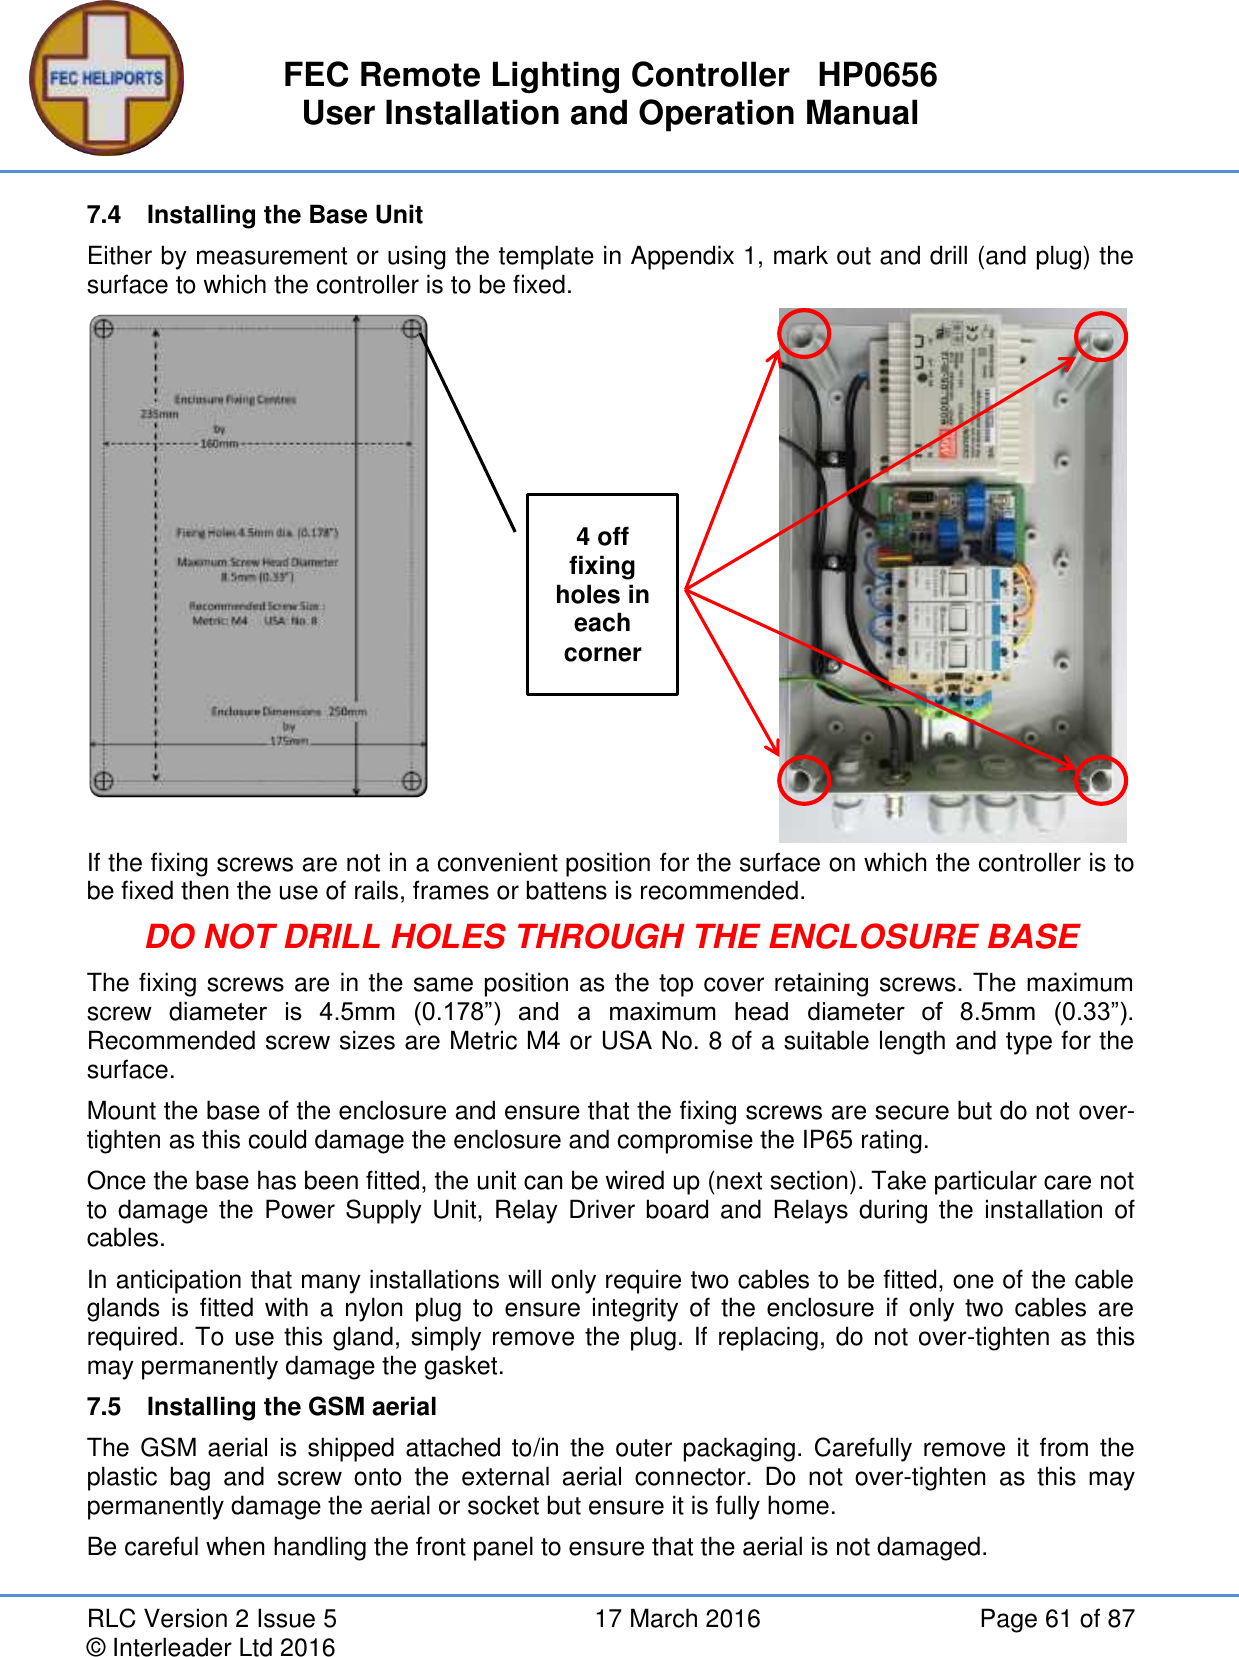 FEC Remote Lighting Controller   HP0656 User Installation and Operation Manual RLC Version 2 Issue 5  17 March 2016  Page 61 of 87 © Interleader Ltd 2016 7.4  Installing the Base Unit Either by measurement or using the template in Appendix 1, mark out and drill (and plug) the surface to which the controller is to be fixed.              If the fixing screws are not in a convenient position for the surface on which the controller is to be fixed then the use of rails, frames or battens is recommended. DO NOT DRILL HOLES THROUGH THE ENCLOSURE BASE The fixing screws are in the same position as the top cover retaining screws. The maximum screw  diameter  is  4.5mm  (0.178”)  and  a  maximum  head  diameter  of  8.5mm  (0.33”). Recommended screw sizes are Metric M4 or USA No. 8 of a suitable length and type for the surface. Mount the base of the enclosure and ensure that the fixing screws are secure but do not over-tighten as this could damage the enclosure and compromise the IP65 rating. Once the base has been fitted, the unit can be wired up (next section). Take particular care not to damage the Power Supply Unit, Relay Driver board and Relays during the installation of cables. In anticipation that many installations will only require two cables to be fitted, one of the cable glands is fitted  with a nylon  plug  to  ensure integrity of  the  enclosure if  only two cables  are required. To use this gland, simply remove the plug. If replacing, do not over-tighten as this may permanently damage the gasket. 7.5  Installing the GSM aerial The GSM aerial is shipped attached to/in  the outer packaging. Carefully remove it from the plastic  bag  and  screw  onto  the  external  aerial  connector.  Do  not  over-tighten  as  this  may permanently damage the aerial or socket but ensure it is fully home. Be careful when handling the front panel to ensure that the aerial is not damaged.   4 off fixing holes in each corner 